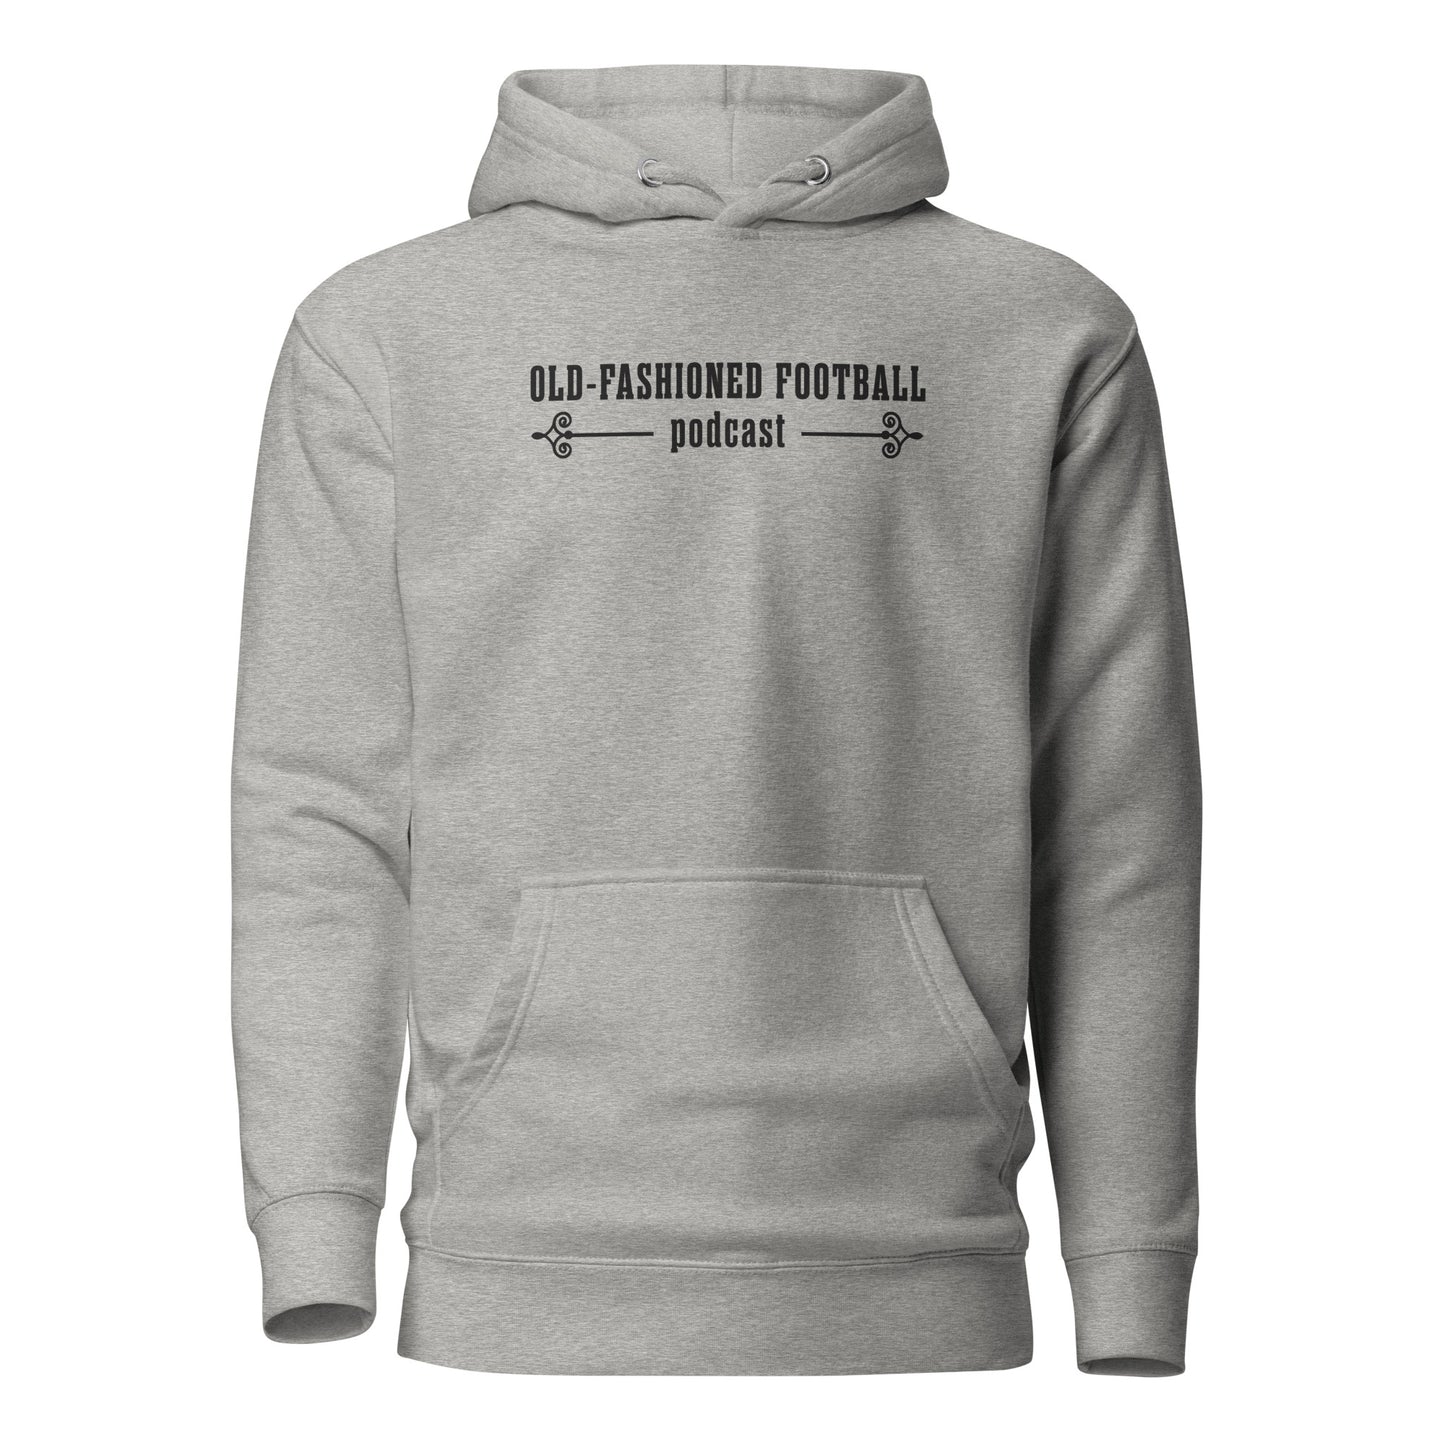 Old-Fashioned Football Podcast - SGPN Fantasy Football - Unisex Hoodie